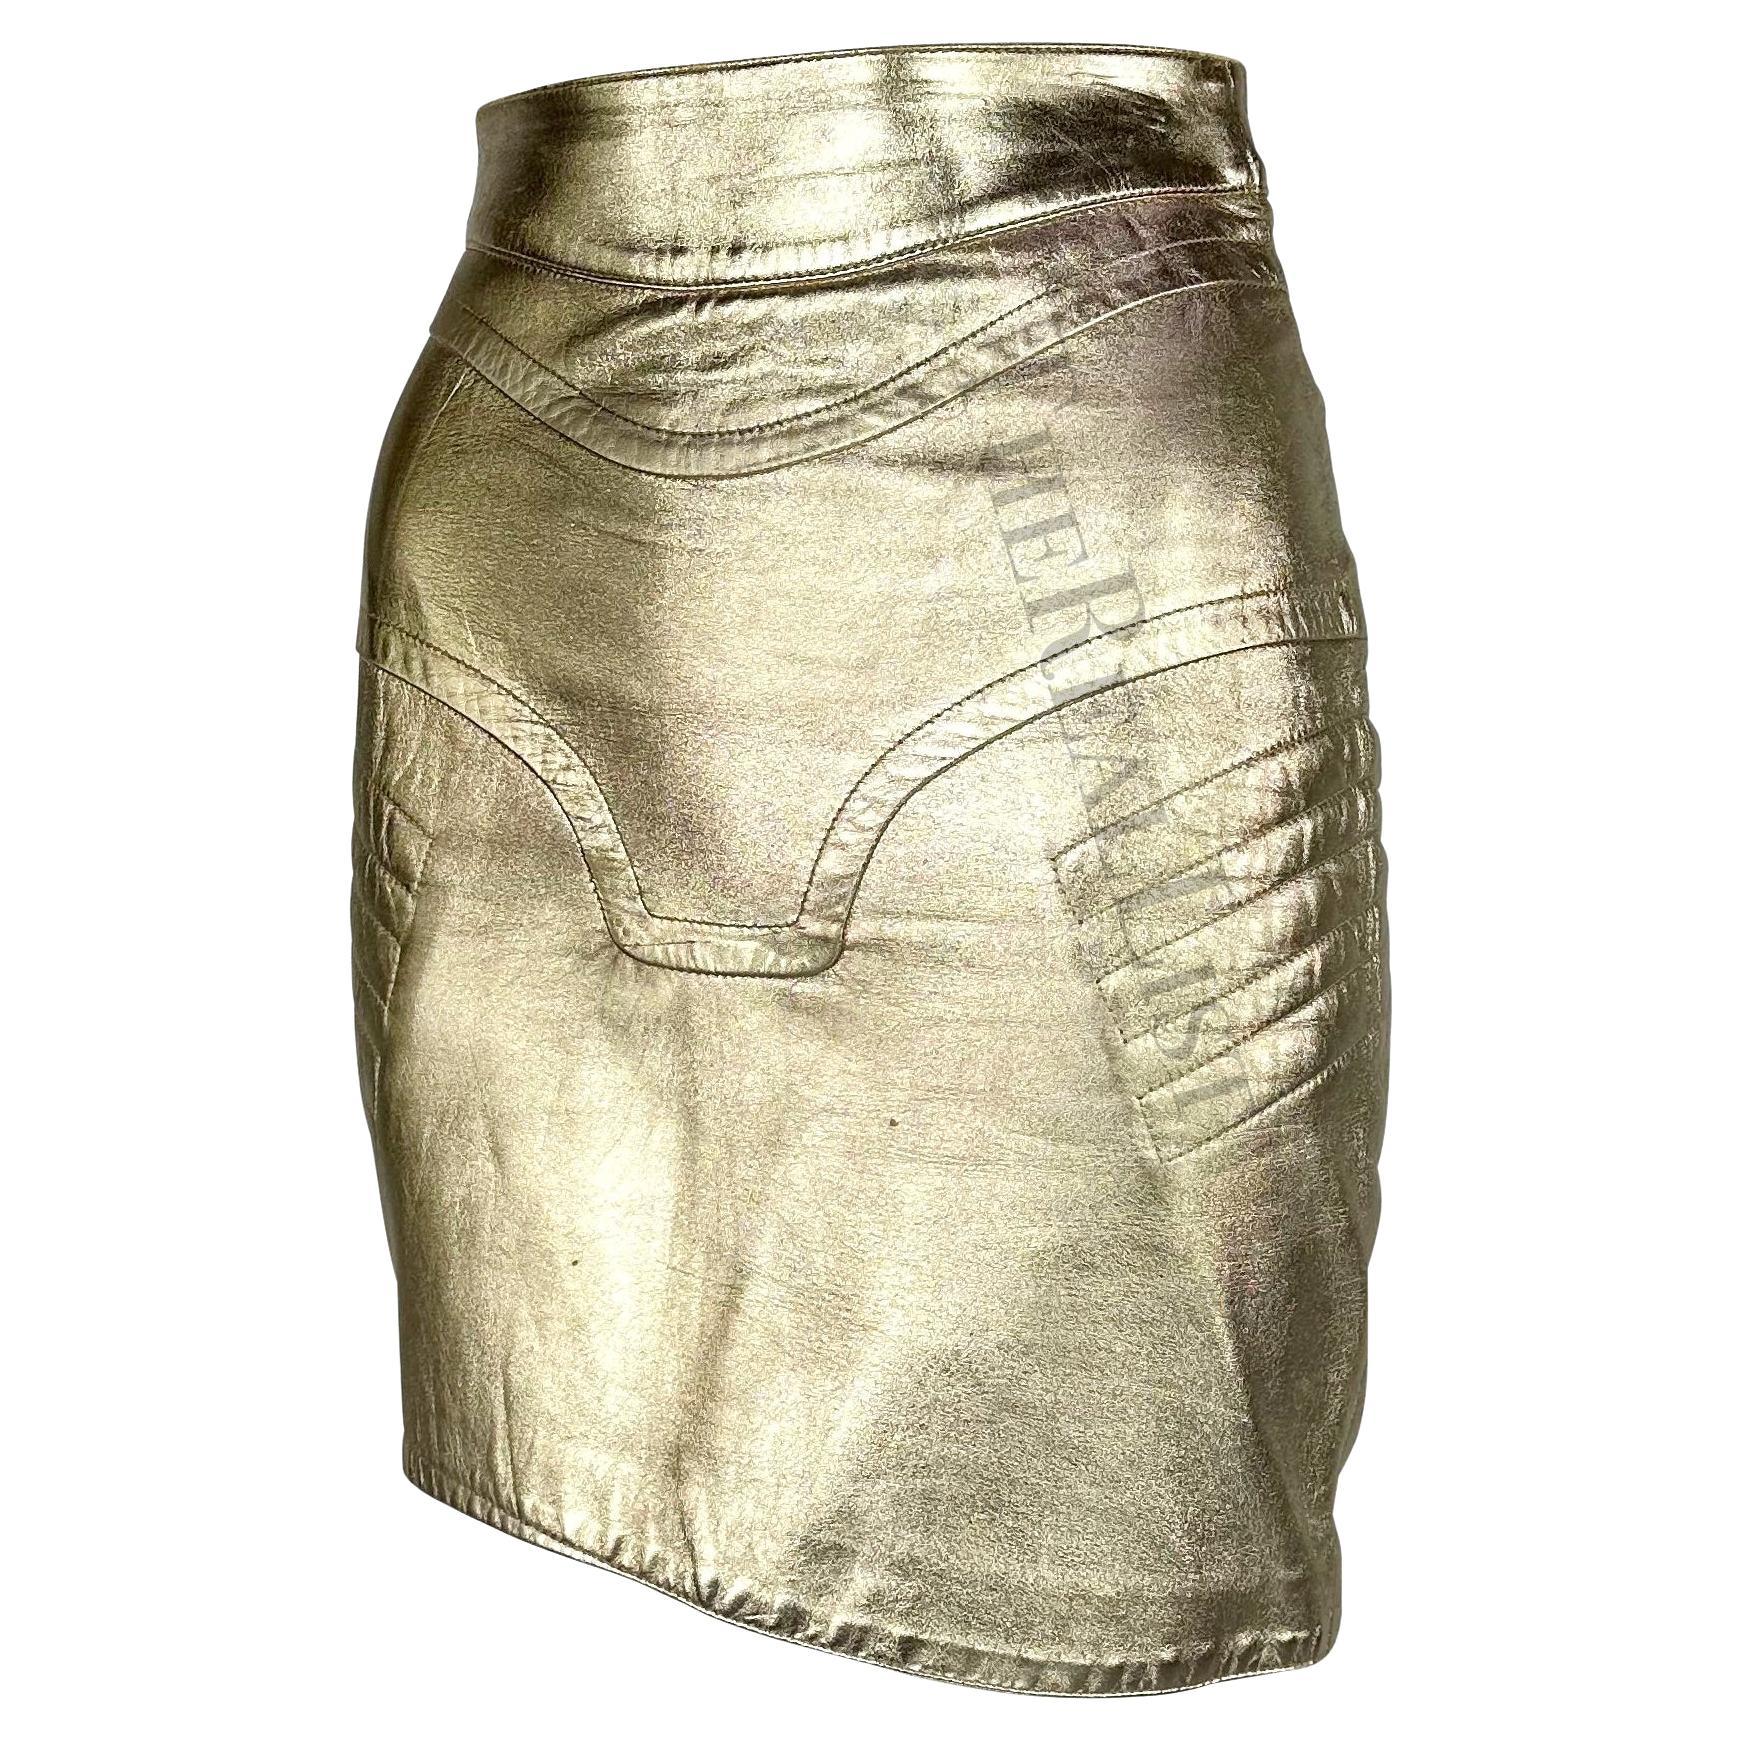 Presenting a fabulous gold-tone leather Thierry Mugler skirt. From the late 1980s / early 1990s, this skirt features an asymmetrical hem, a slit at the side, and motocross-style stitching. A perfect encapsulation of Mugler's sexy abstract style,